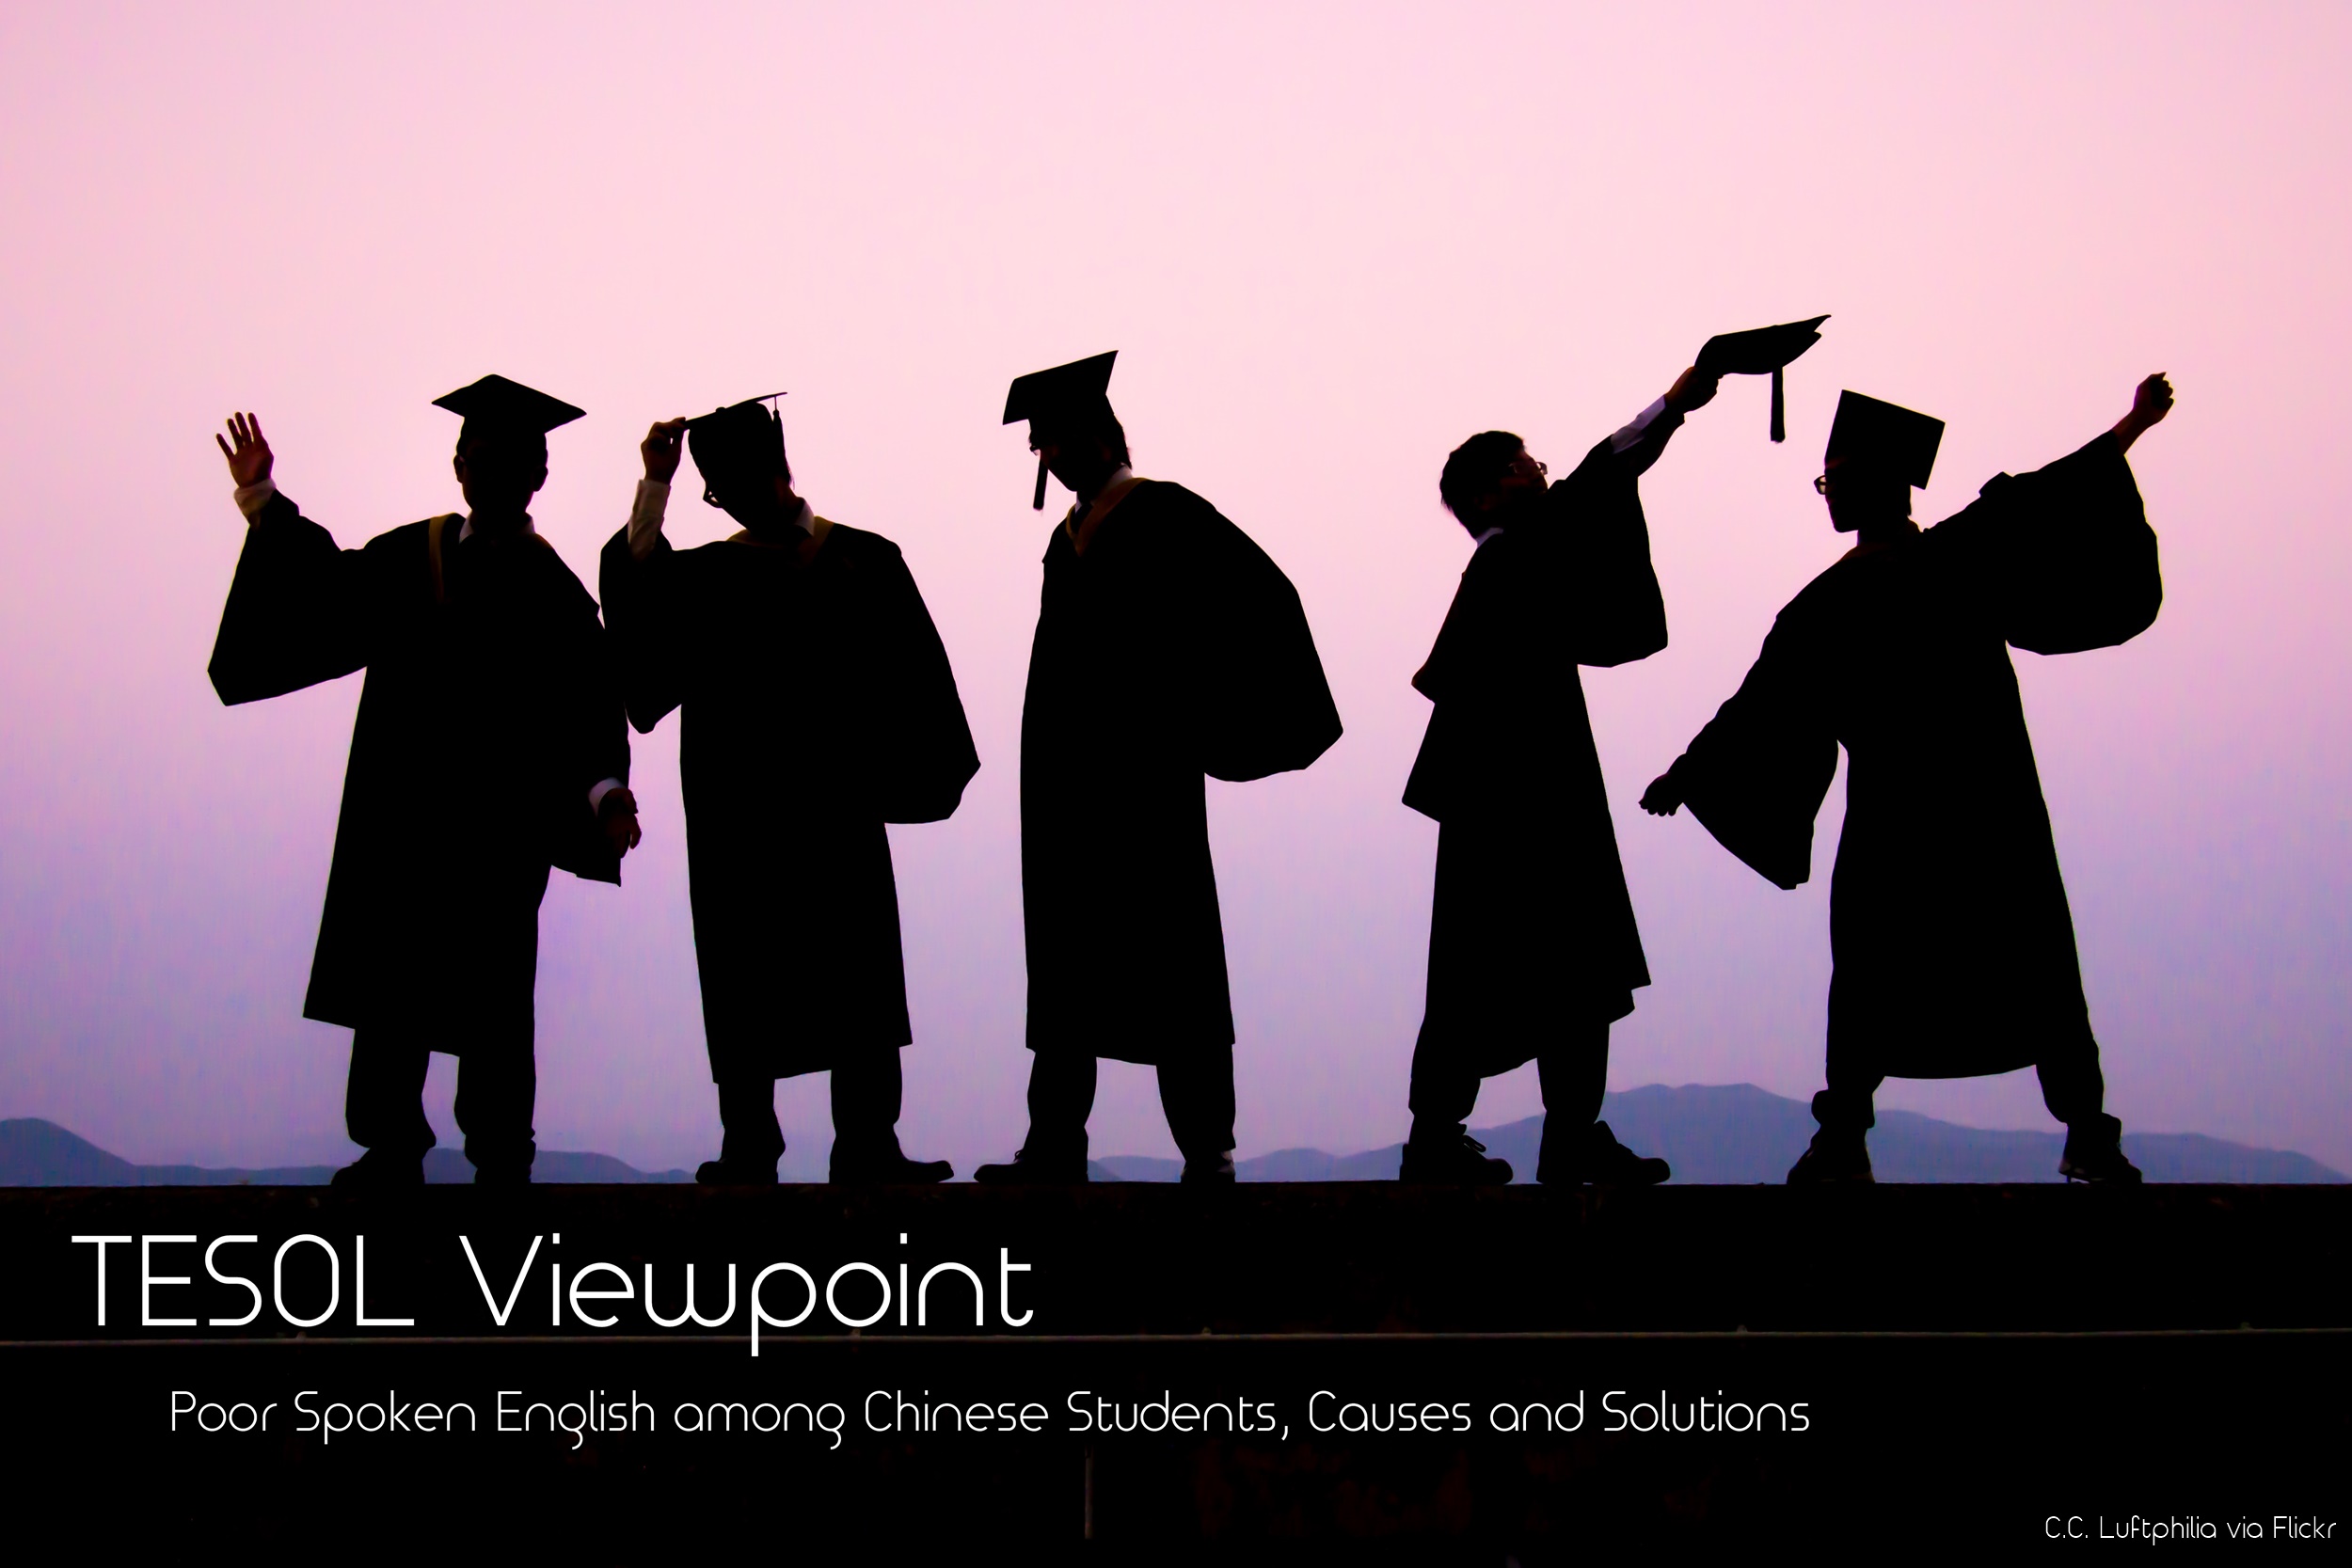 Poor Spoken English among Chinese Students, Causes and Solutions